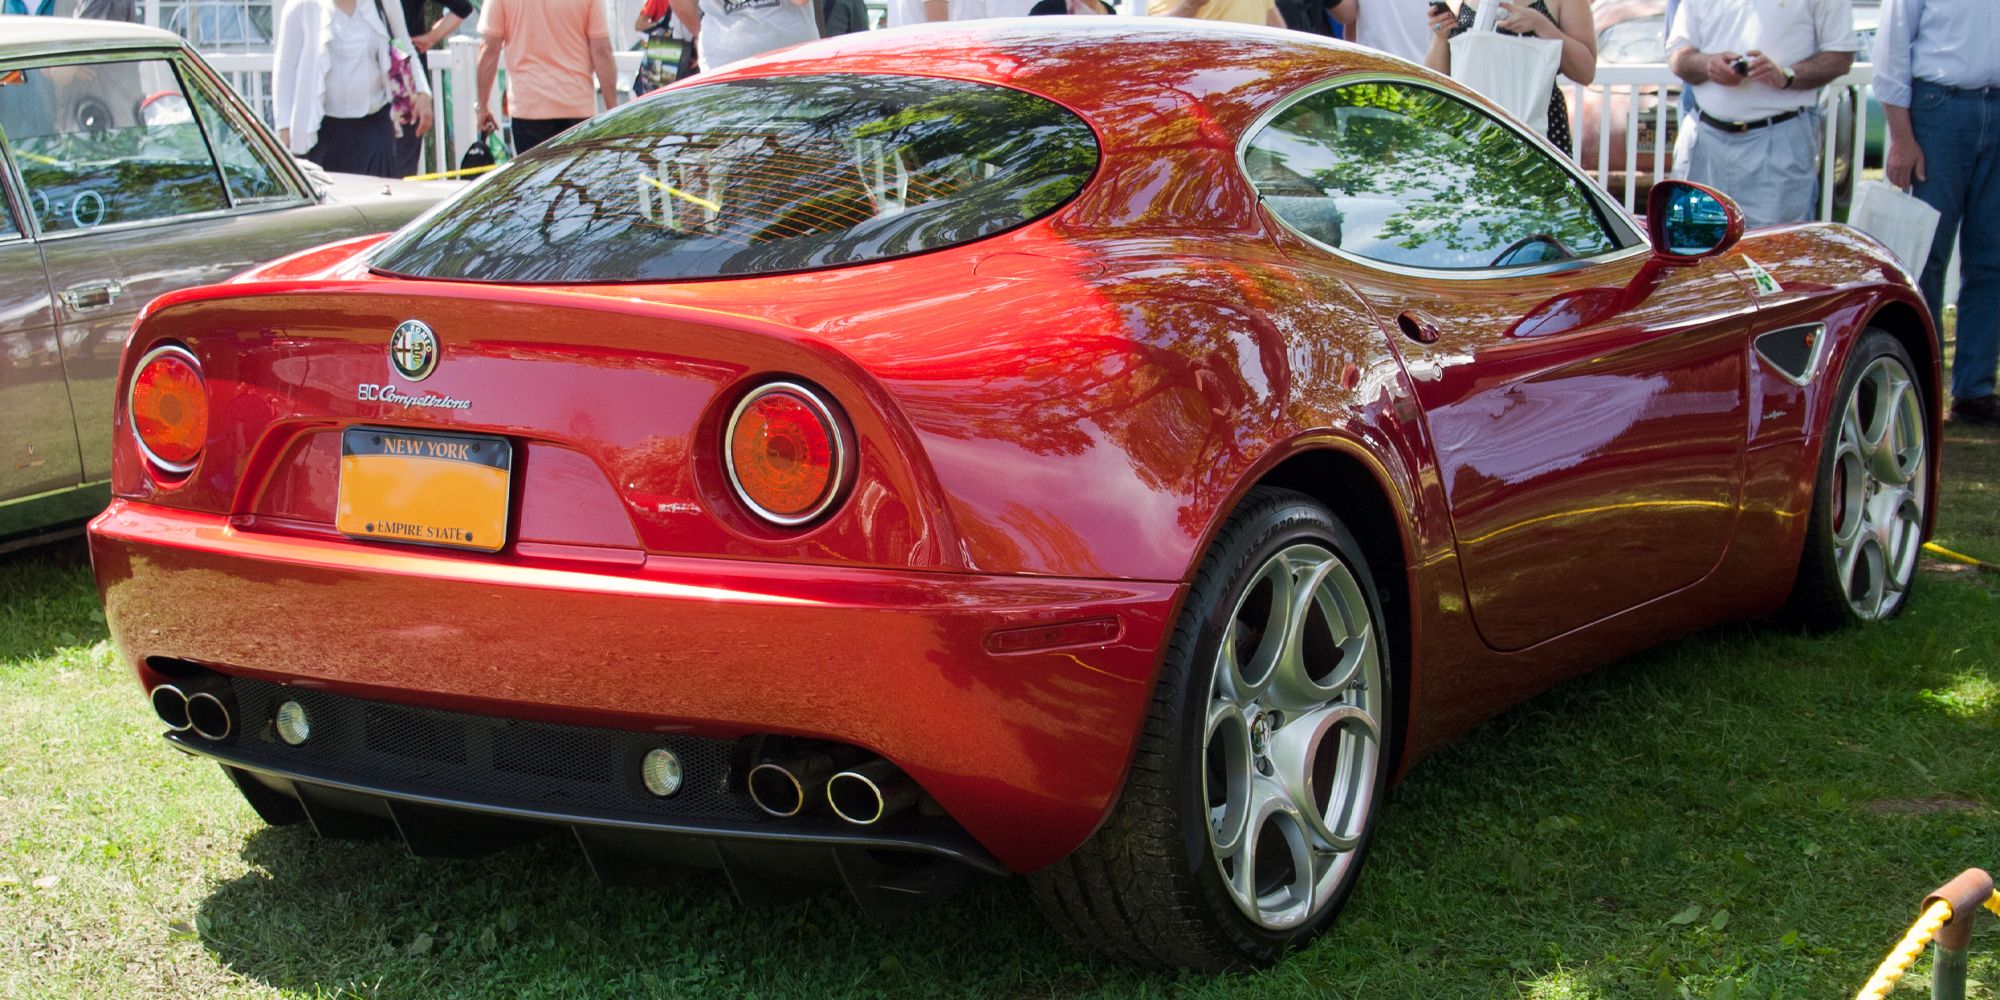 The rear of the 8C